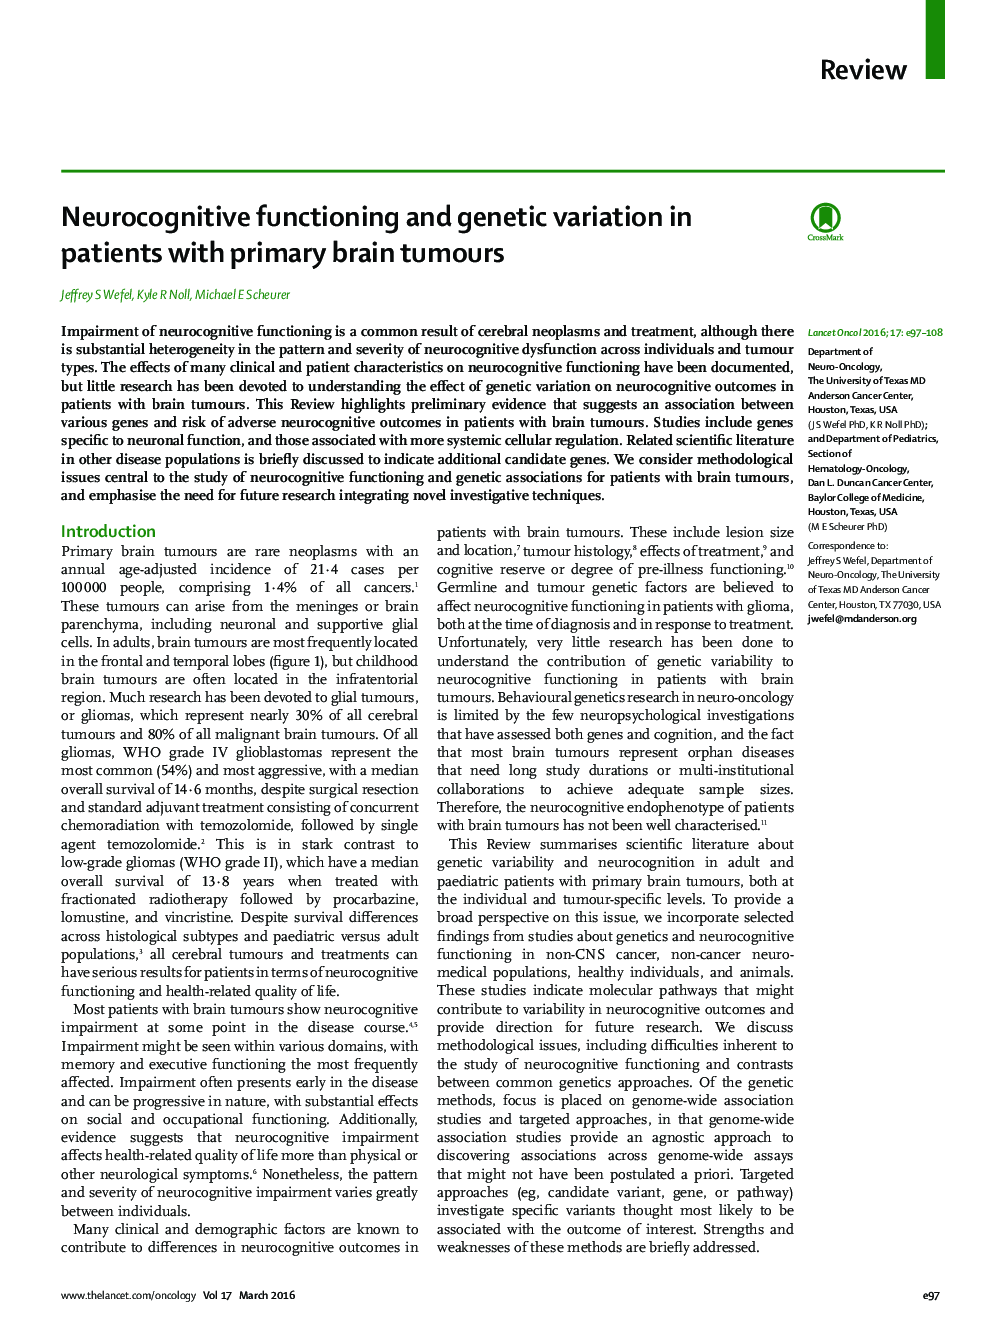 Neurocognitive functioning and genetic variation in patients with primary brain tumours